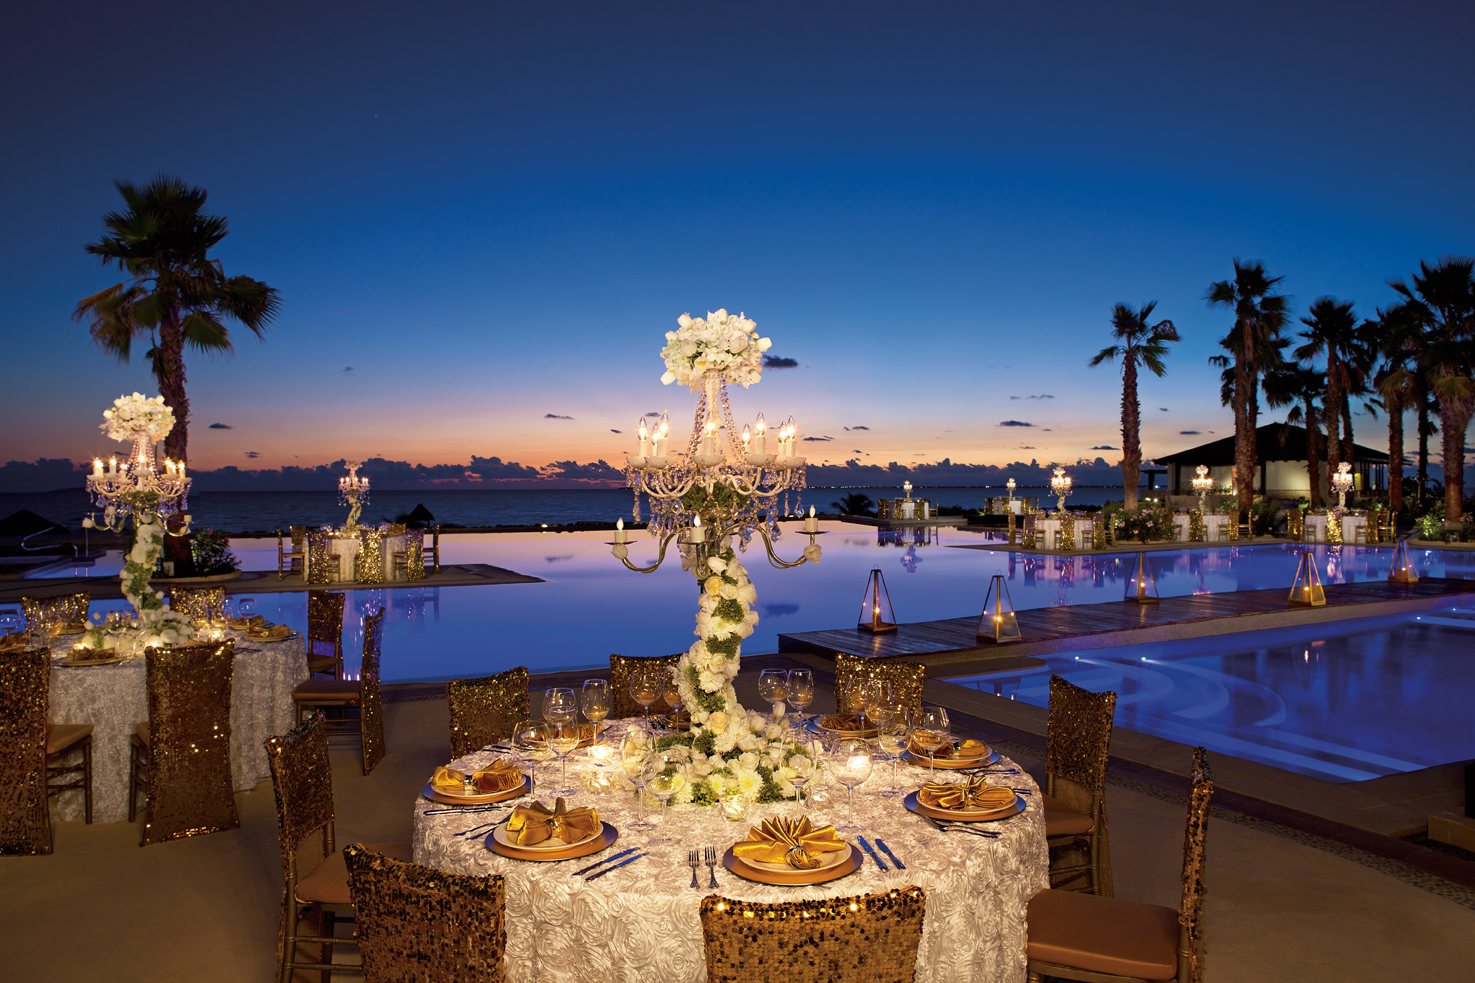 More information about "Say "I Do" To The Secrets Playa Mujeres Wedding Promotion"